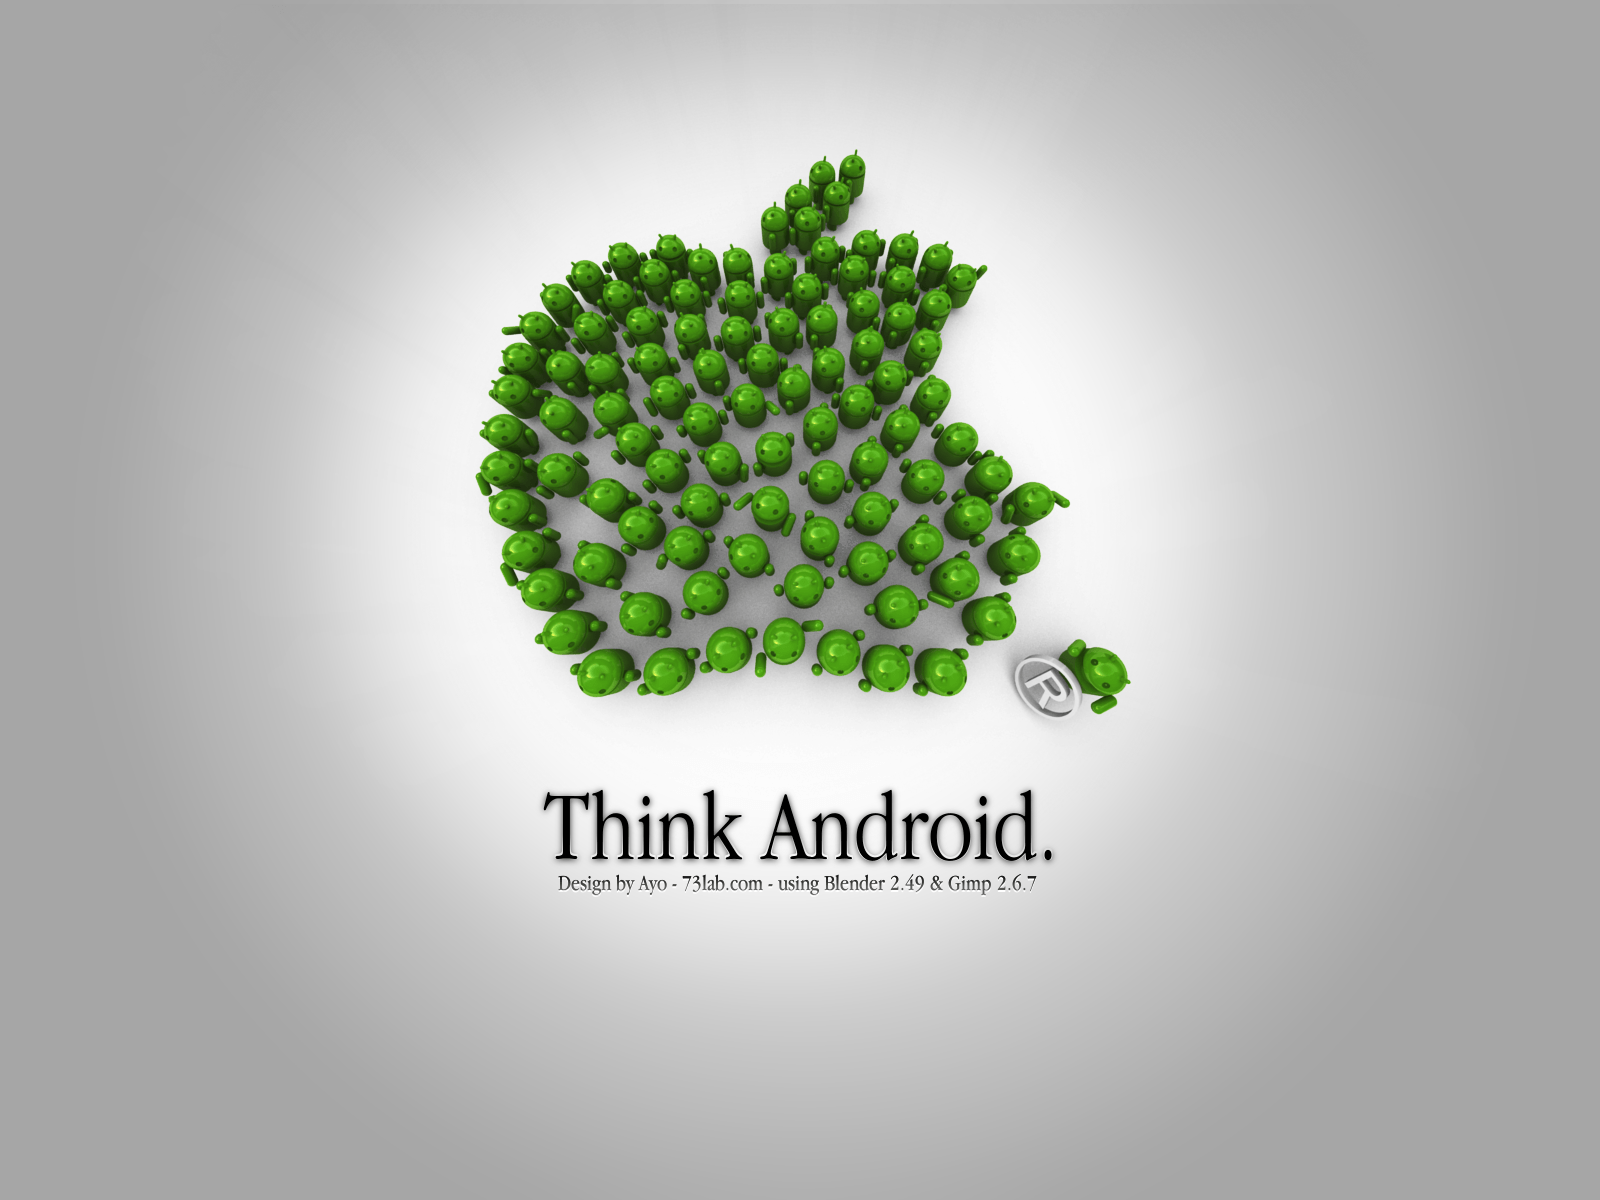 Think Android Vs Apple Wallpaper. TanukinoSippo